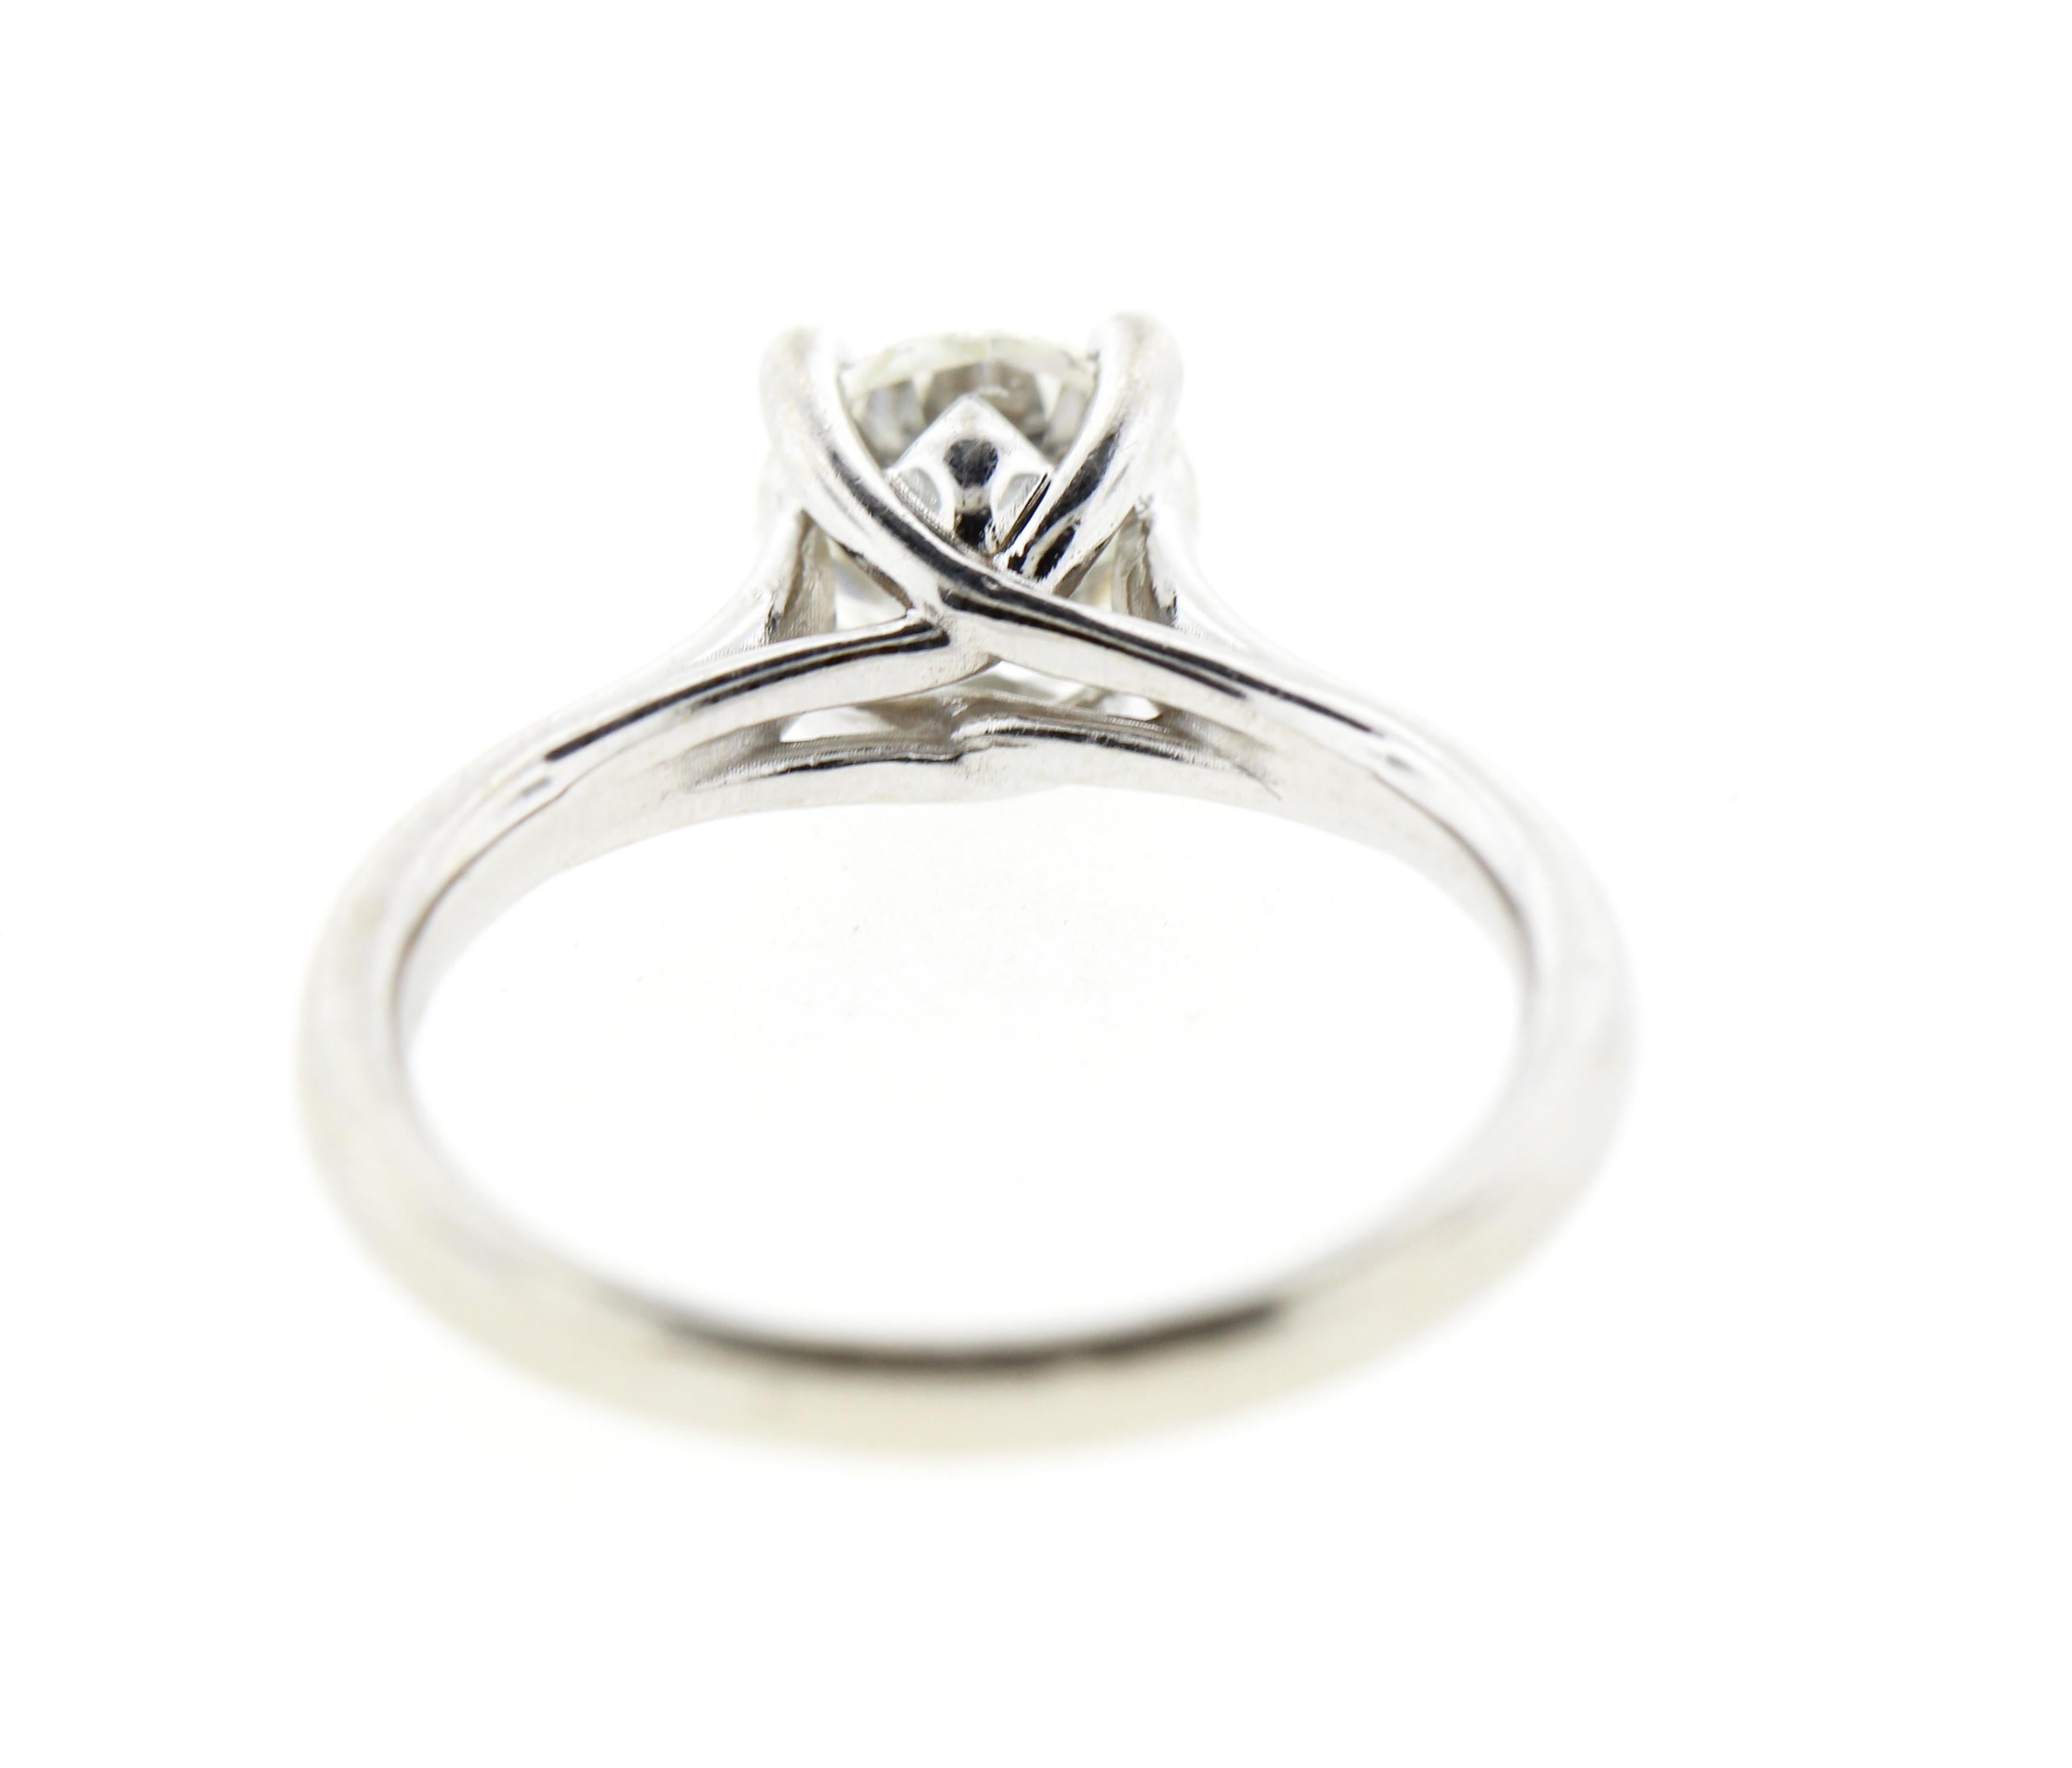 This swooping diamond solitaire engagement ring features a criss cross style basket that cradles the center diamond and features standard prongs. This ring can be customized for any shape center stone and made in any kind of metal, including white